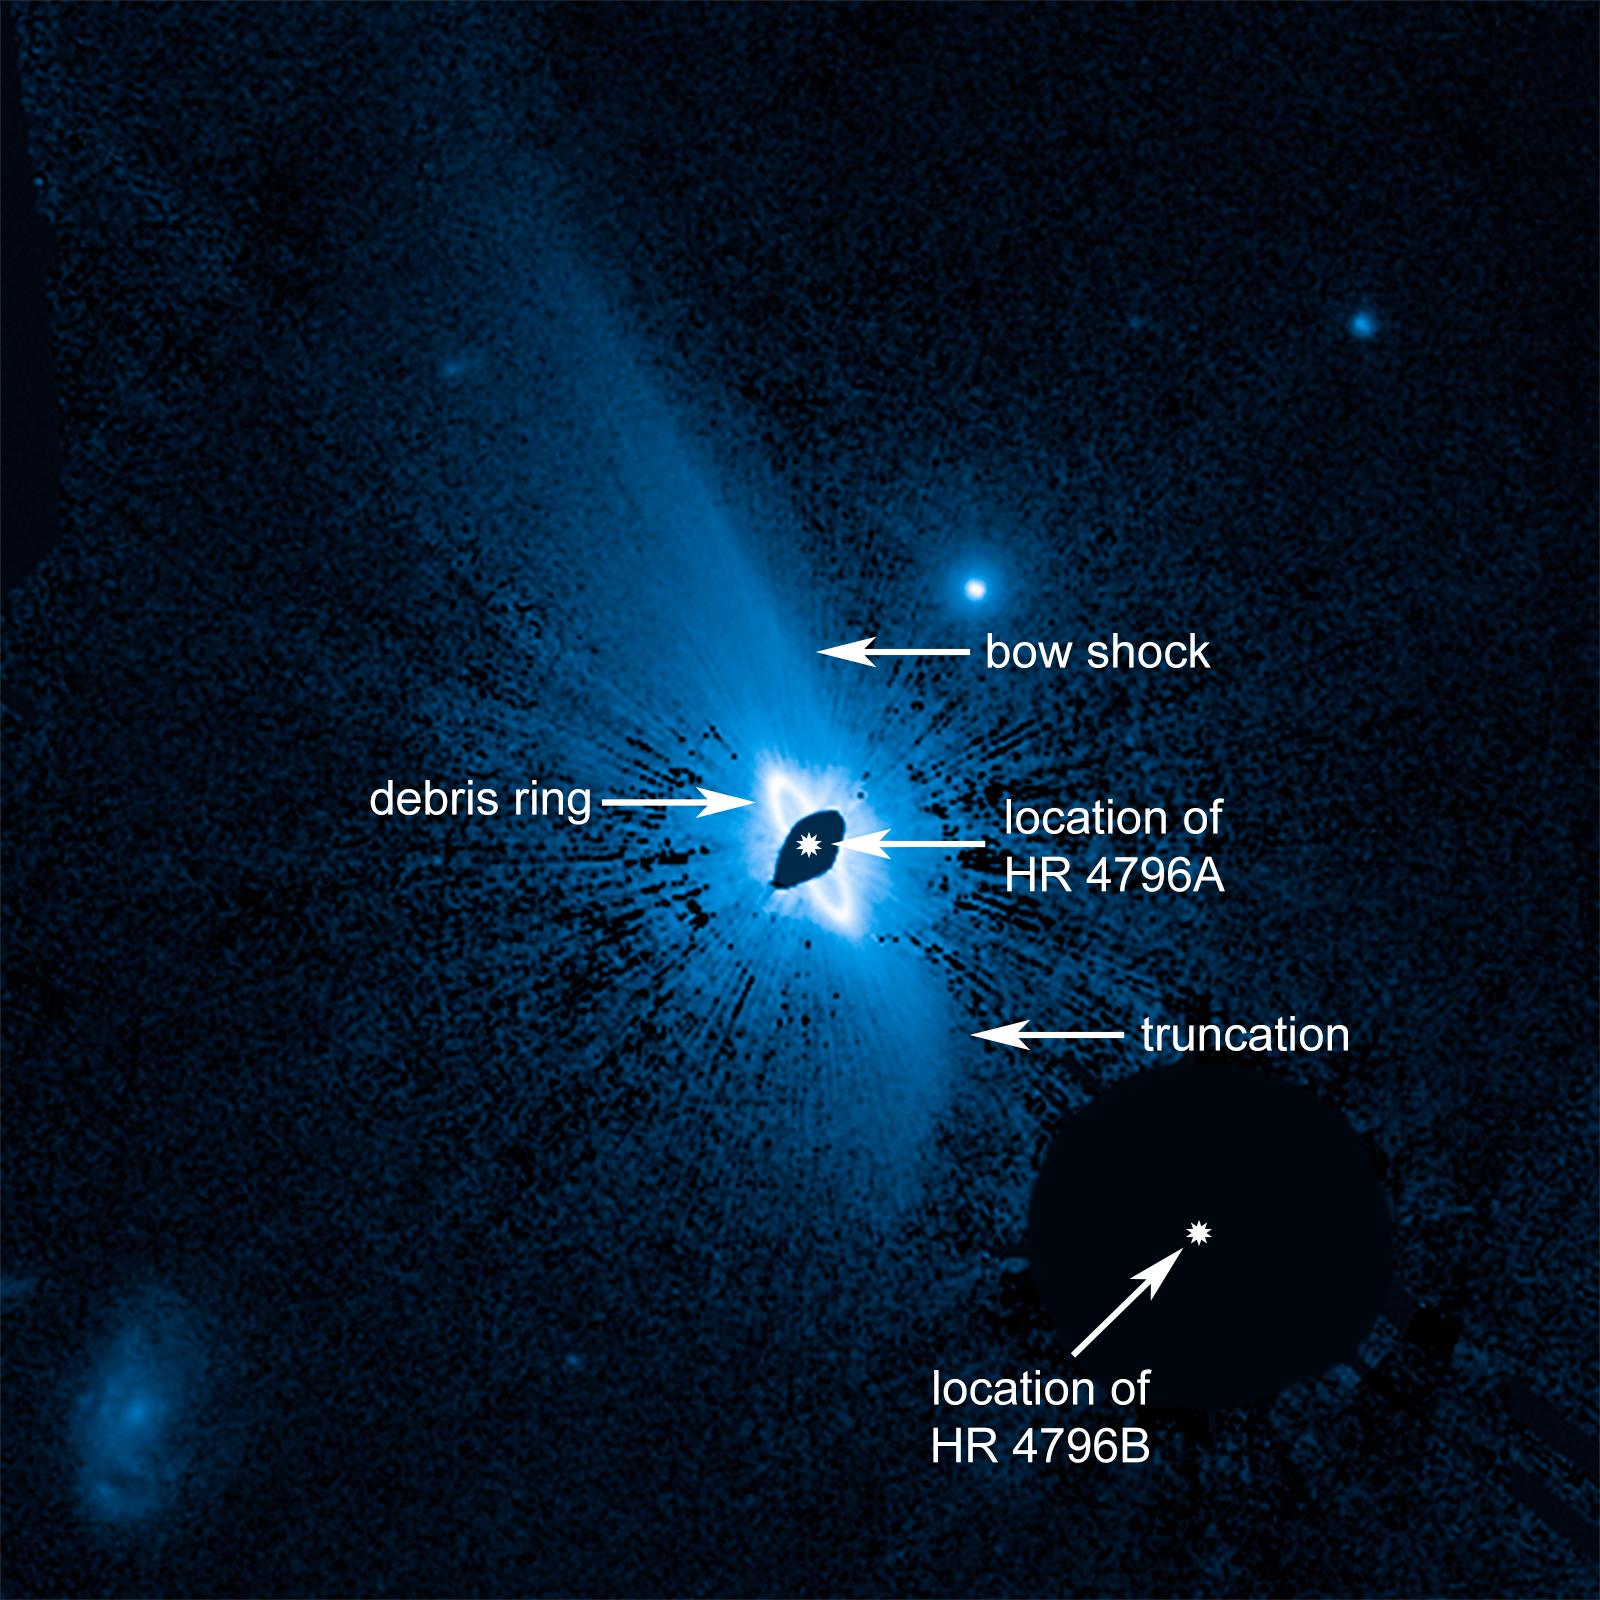 dusty blue image of star system with annotations